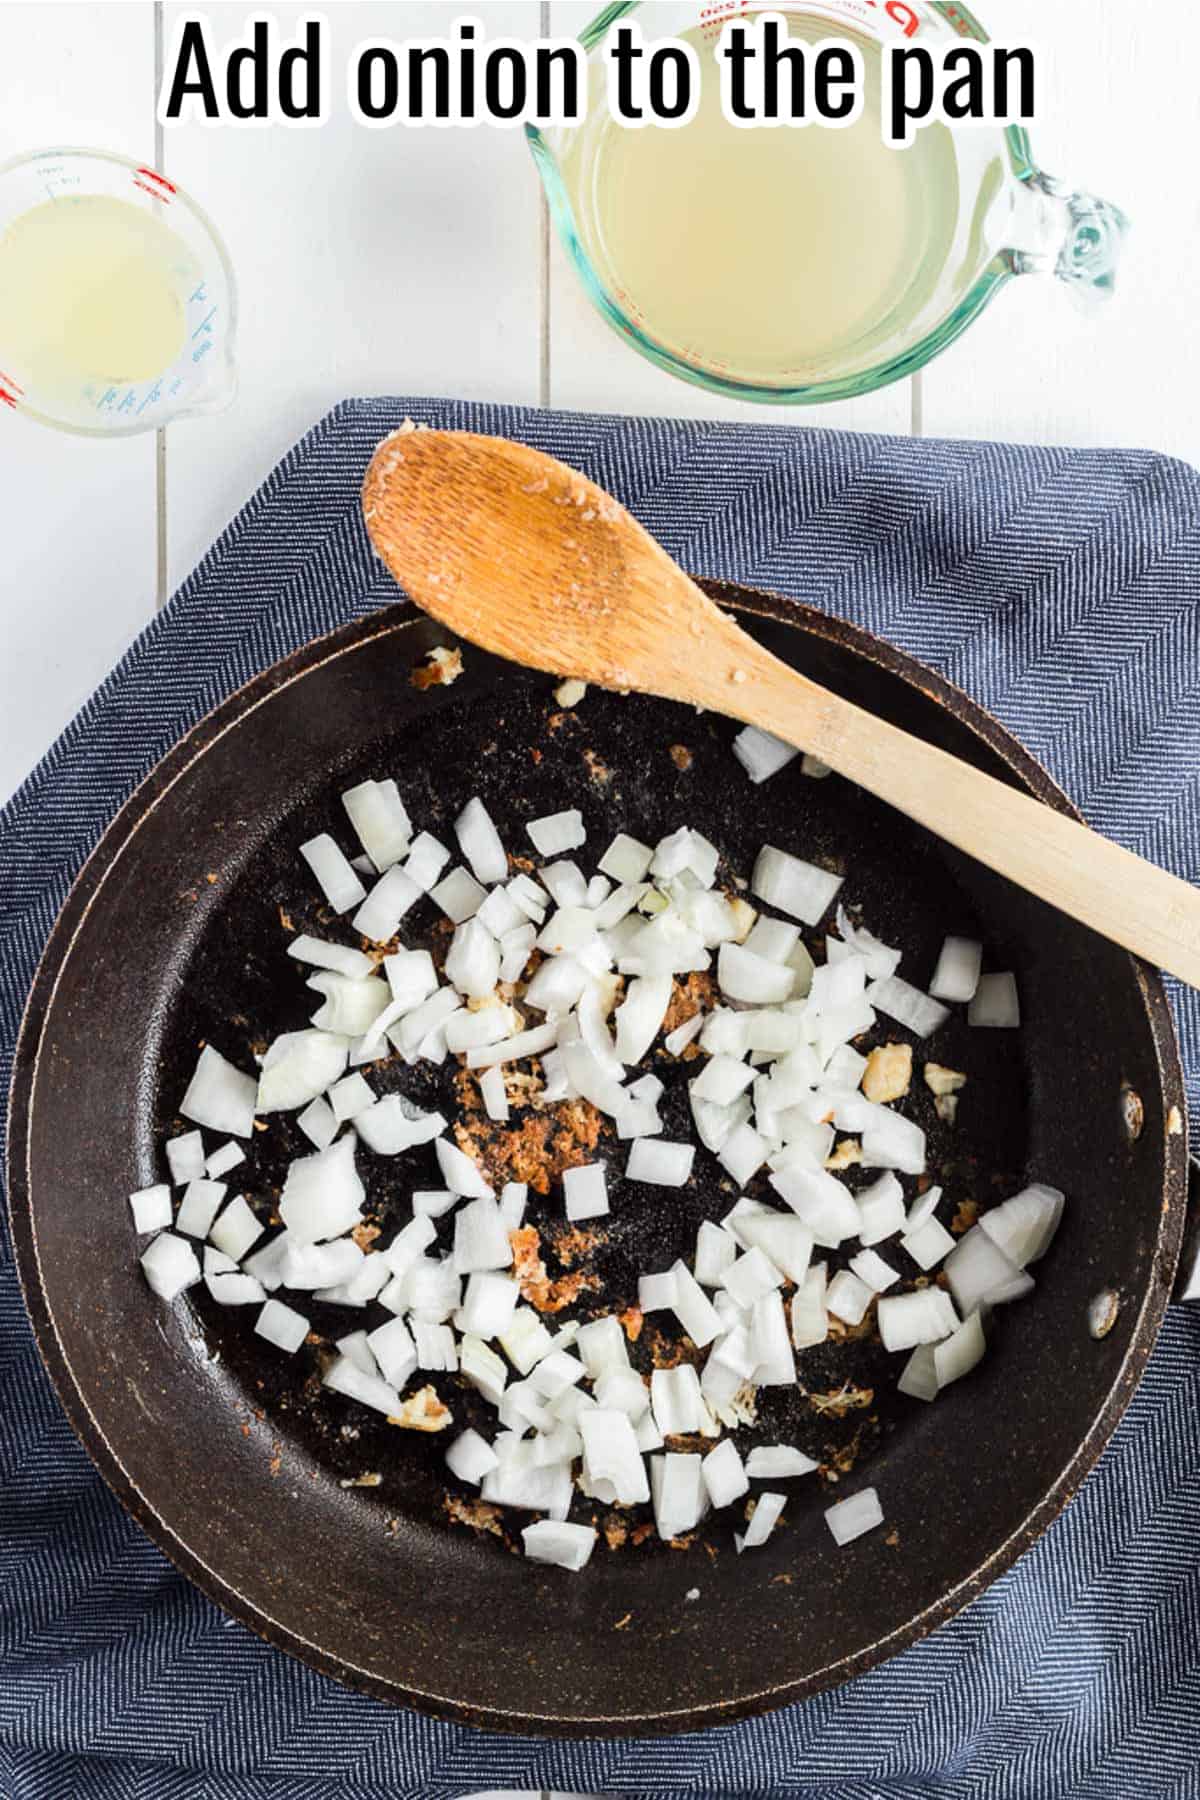 uncooked diced onion in a black skillet.